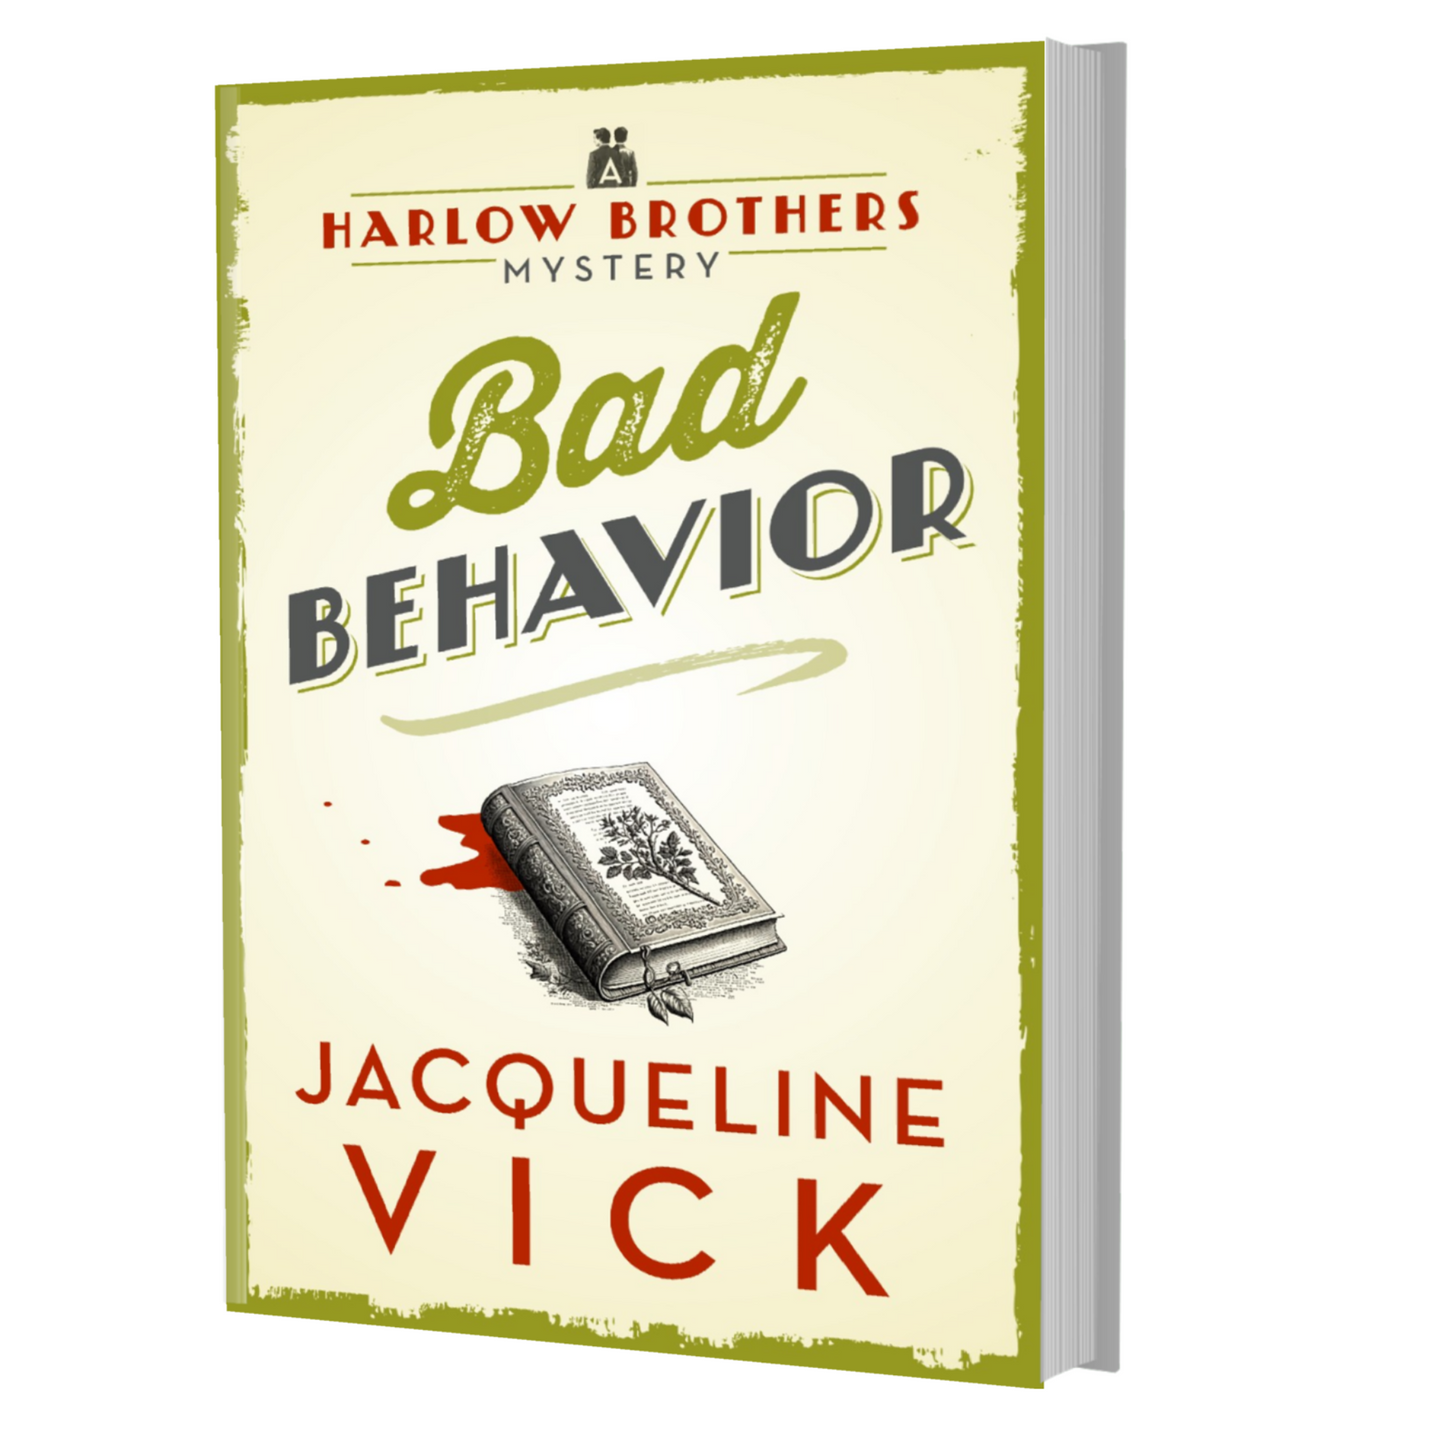 Bad Behavior PAPERBACK (Book 2 in the Harlow Brothers Mysteries)